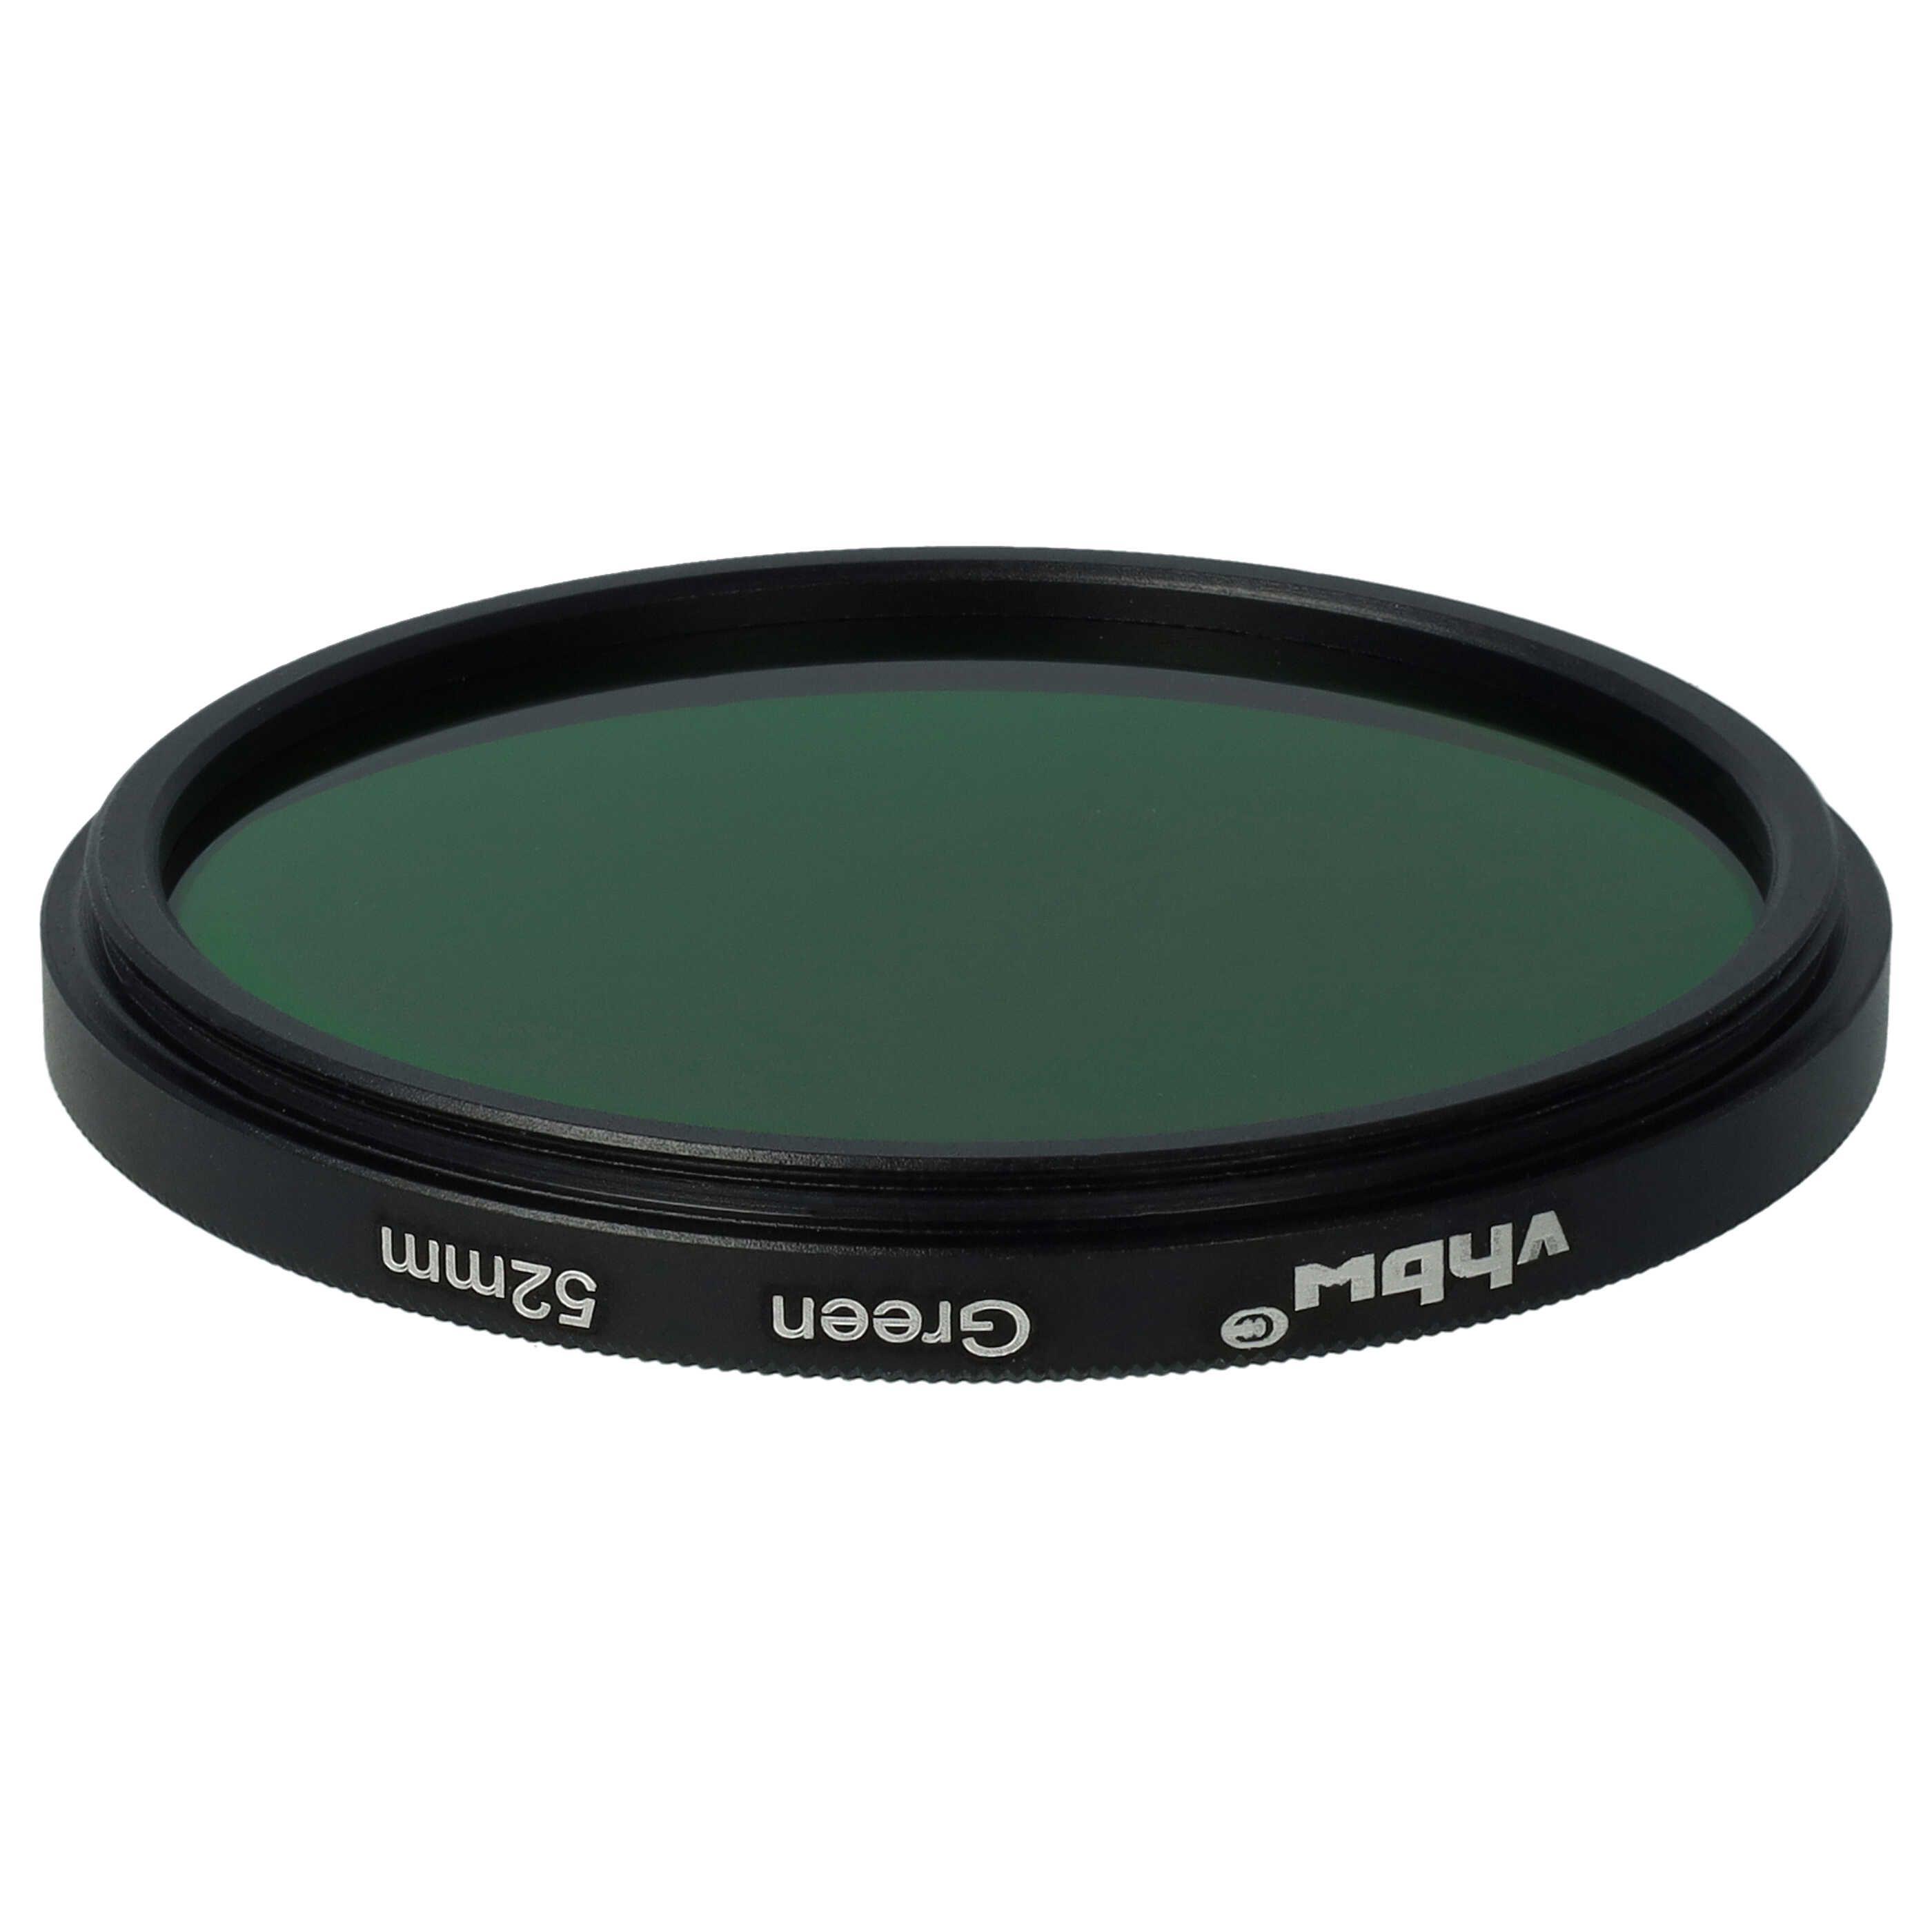 Coloured Filter, Green suitable for Camera Lenses with 52 mm Filter Thread - Green Filter